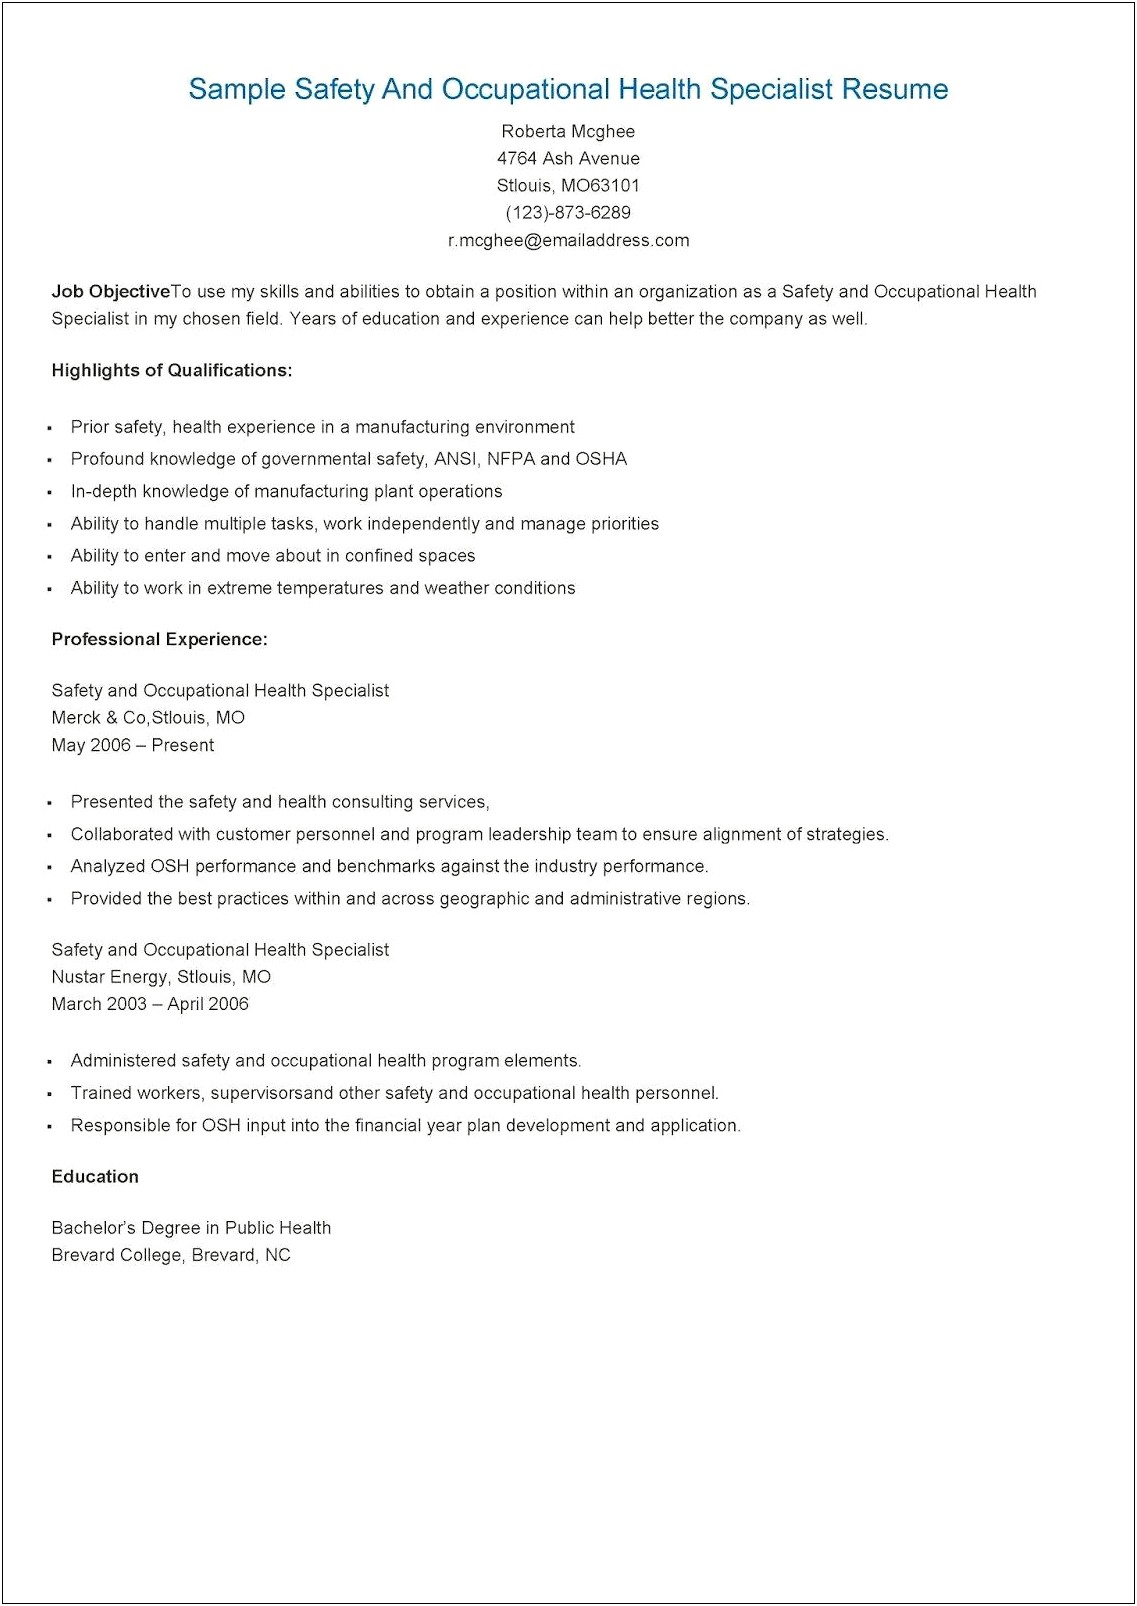 Occupational Health And Safety Resume Objective